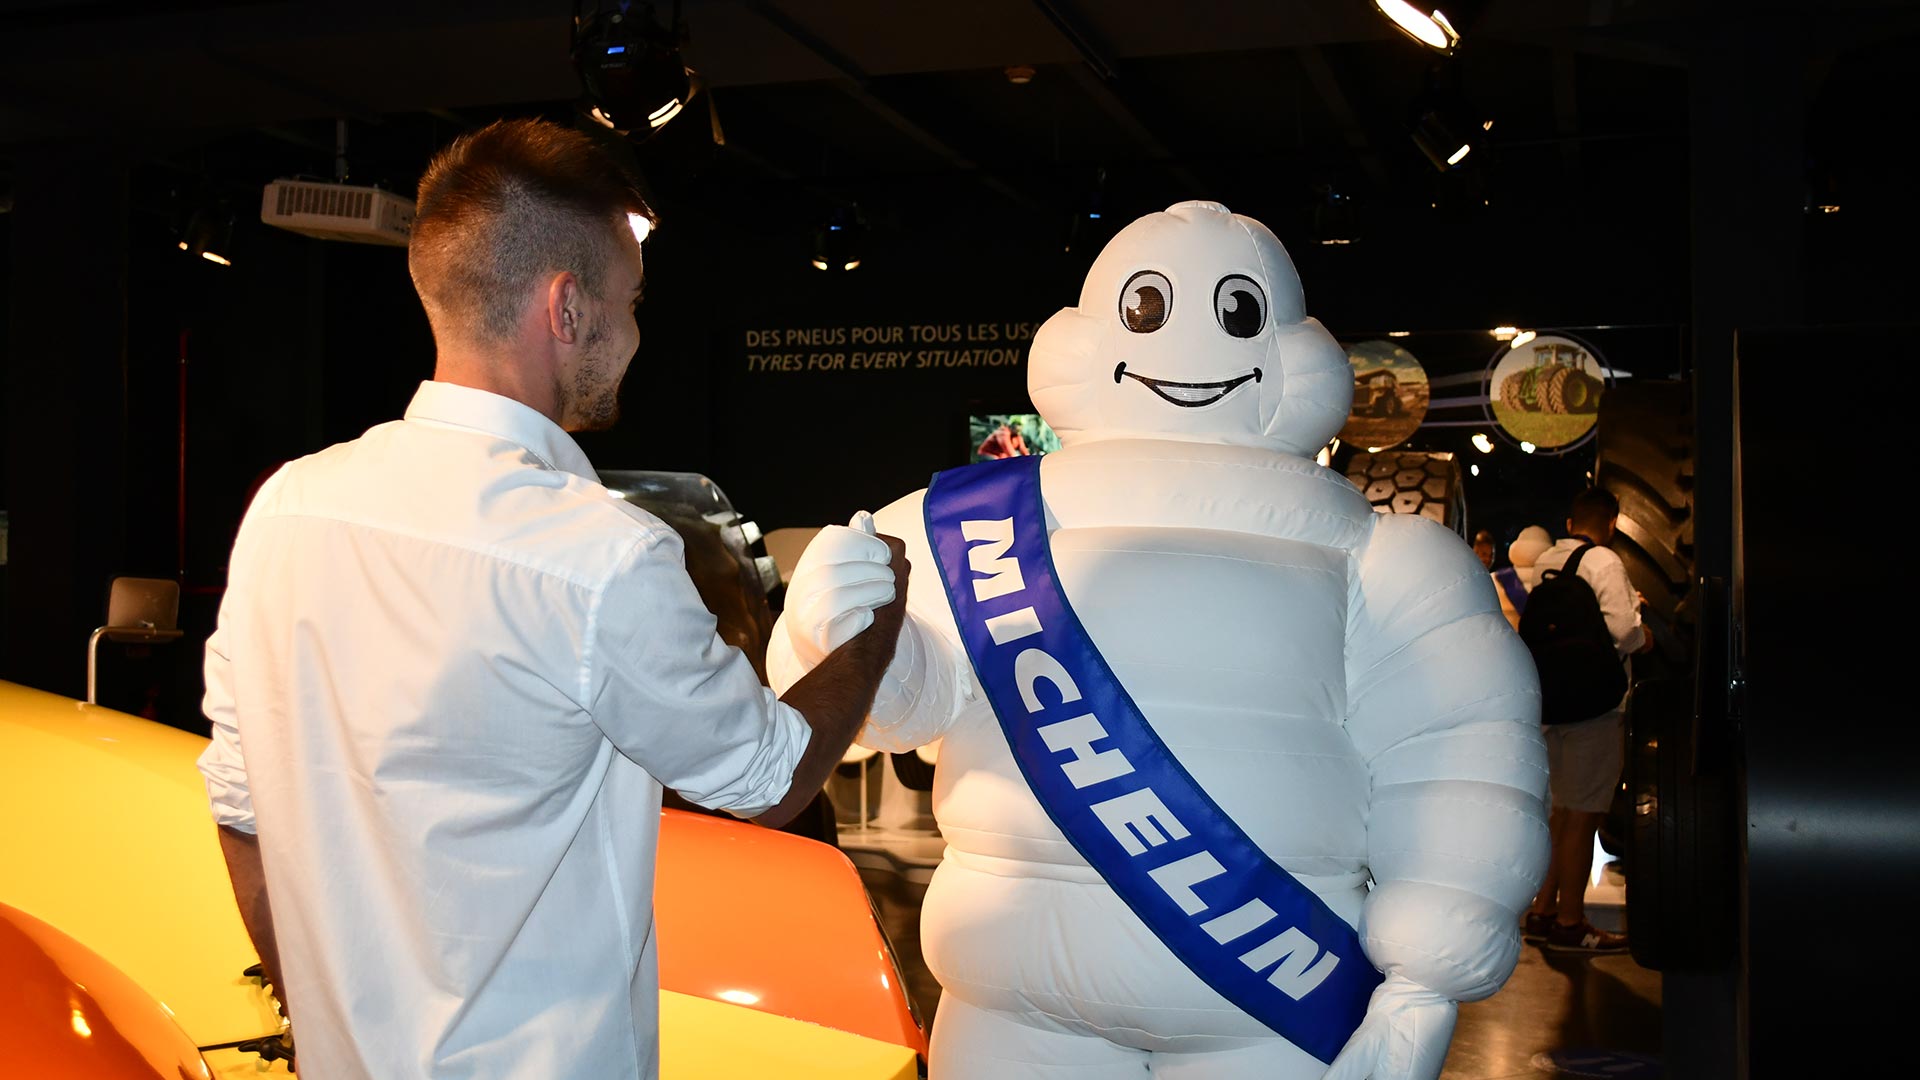 Visitor shaking hands with the Michelin Man